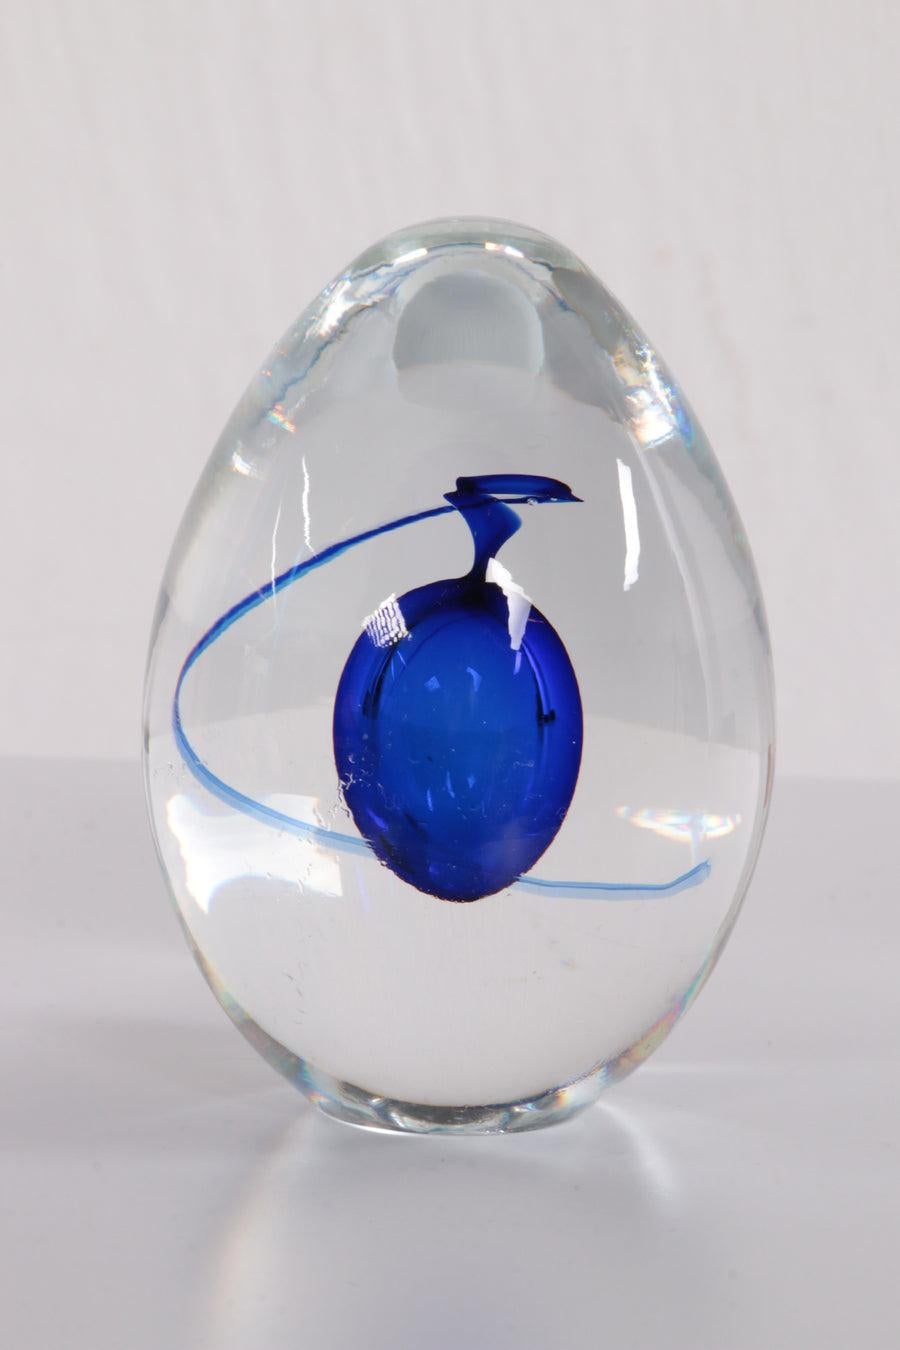 Bohemian Paperweight Egg Shape with Blue Drop Artcristal Bohemia For Sale